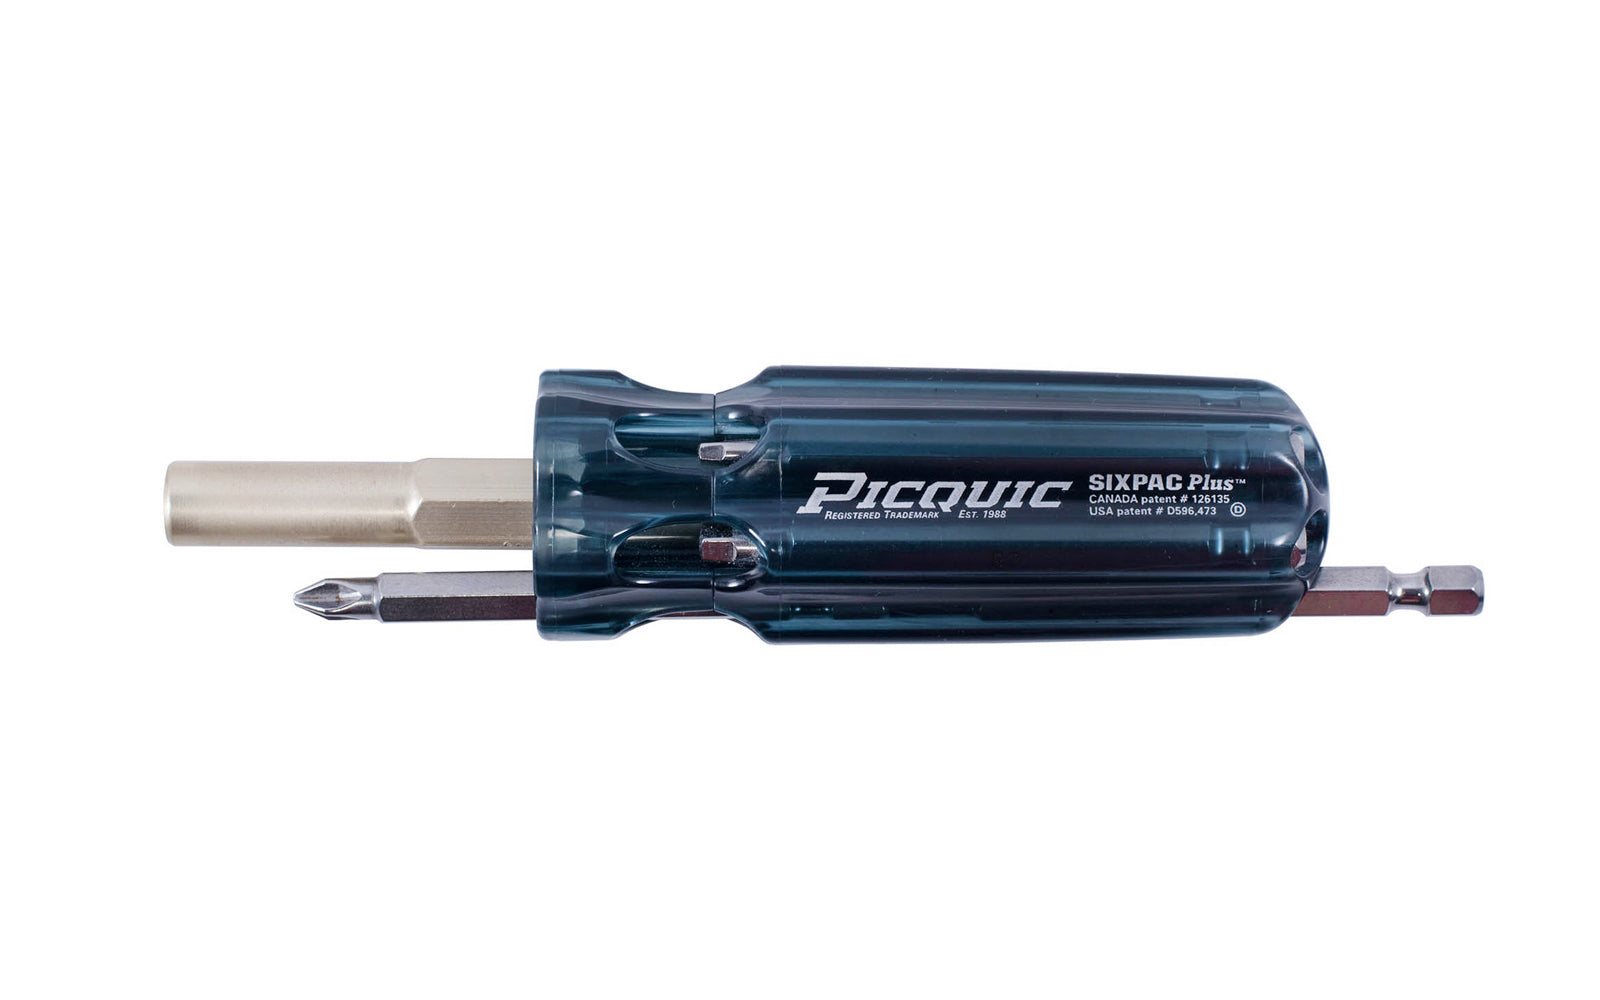 Picquic Model 88101B - Black Color "Sixpac Plus" with a solid handle for comfort & torque, & has no moving parts. Bits included: #1, #2, #3 philips, 1/4", 3/16" slotted, # square, 15 Torx. Sixpac Multi-Bit screwdriver with bit storage in handle. 57369881047. magnetic rare earth magnet holds the working bit in shank